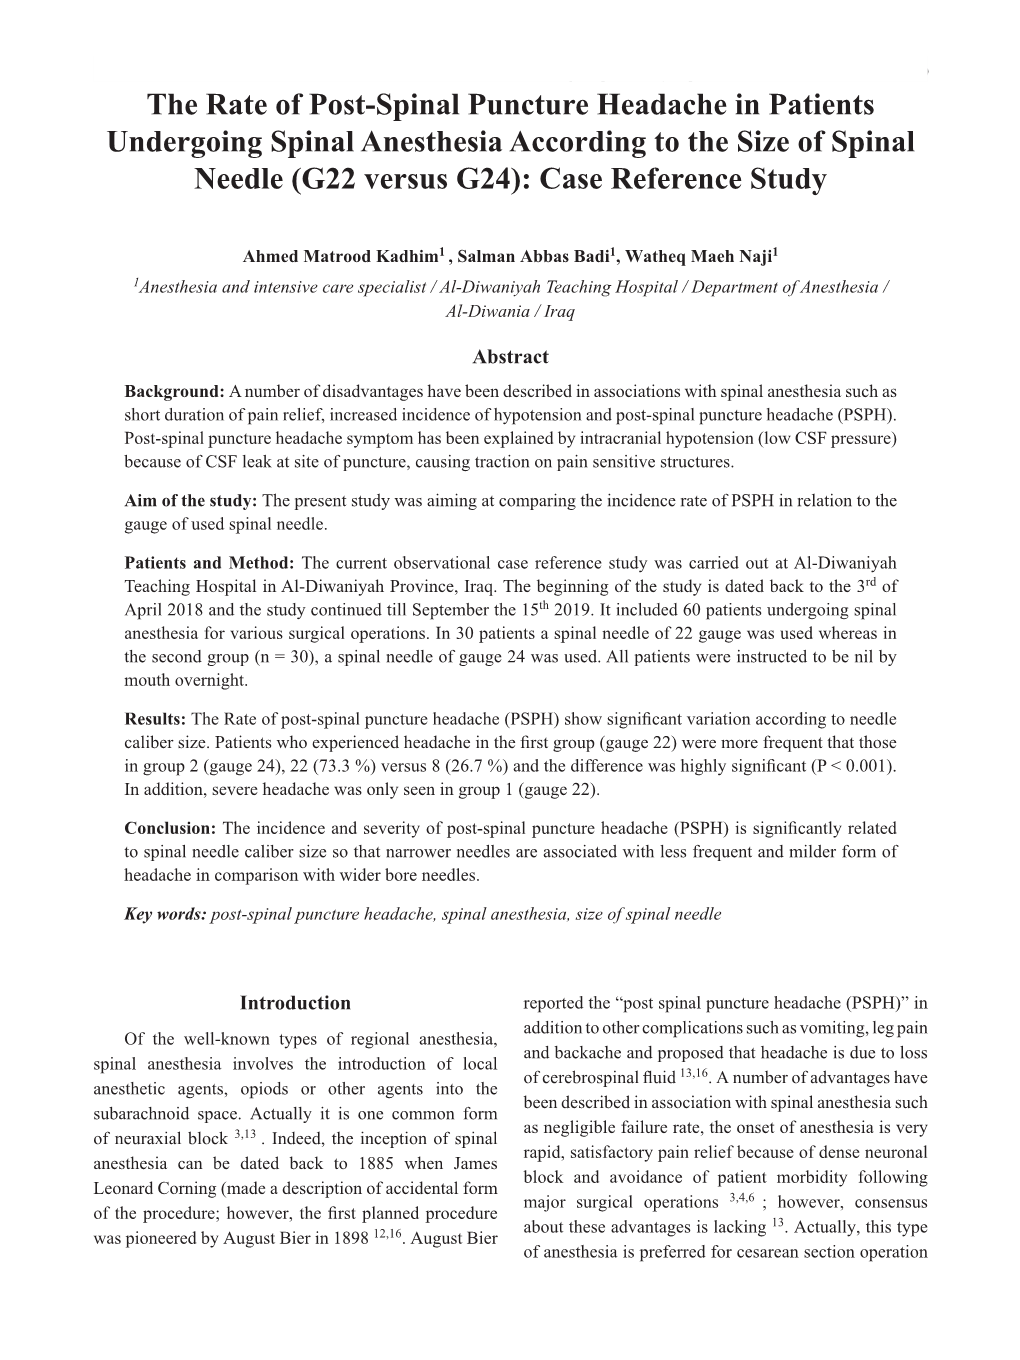 The Rate of Post-Spinal Puncture Headache in Patients Undergoing Spinal Anesthesia According to the Size of Spinal Needle (G22 Versus G24): Case Reference Study